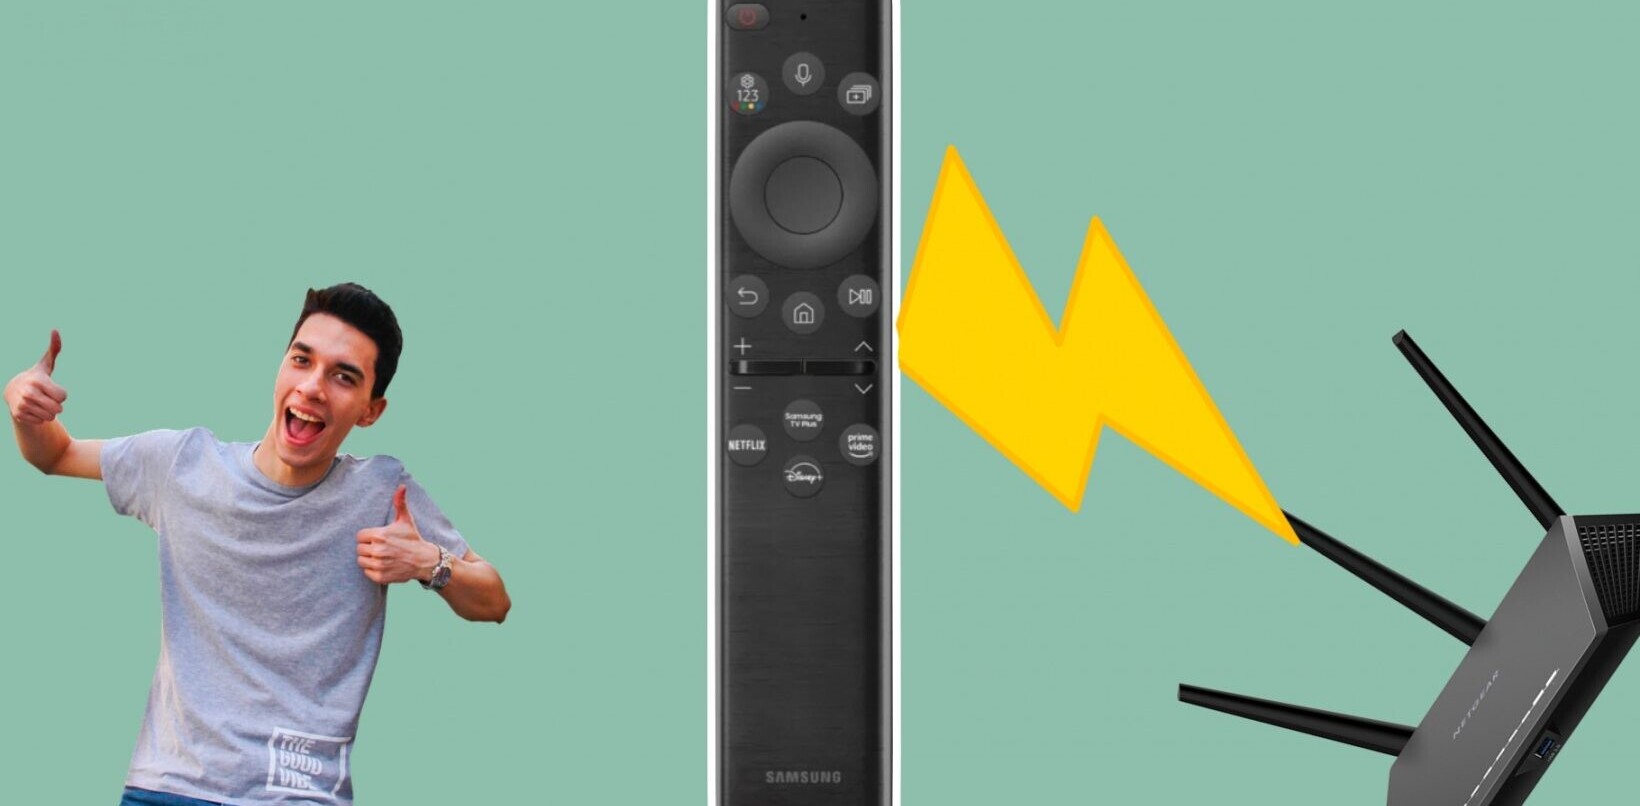 Samsung’s fantastic solar remote can now charge using radio waves — WHAT?!